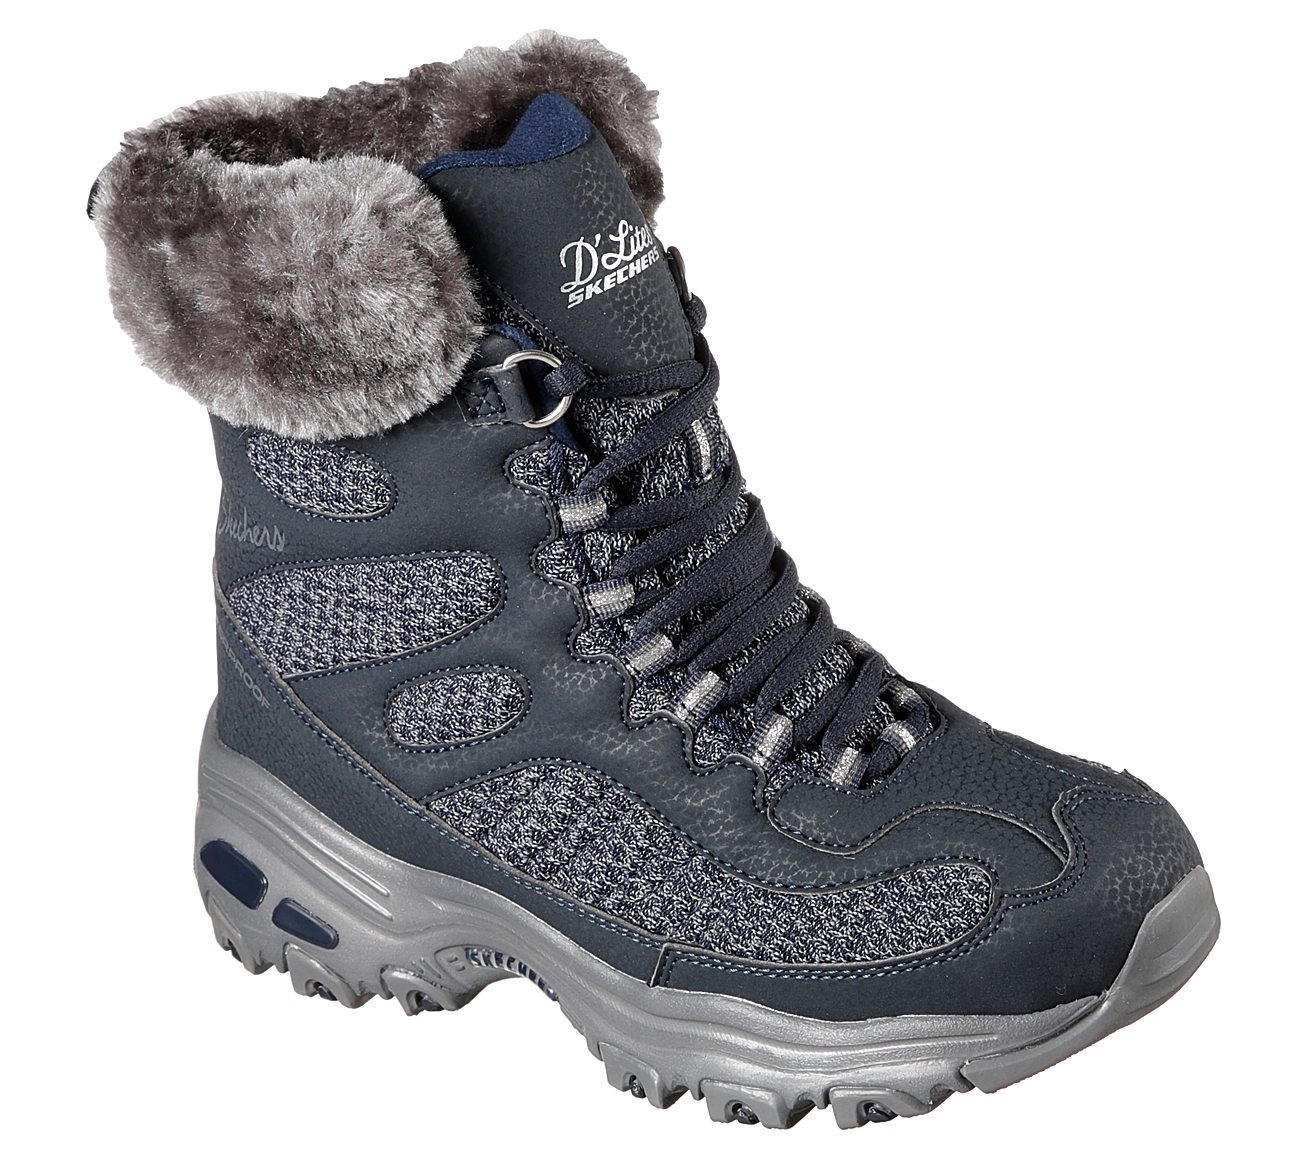 where to buy skechers boots